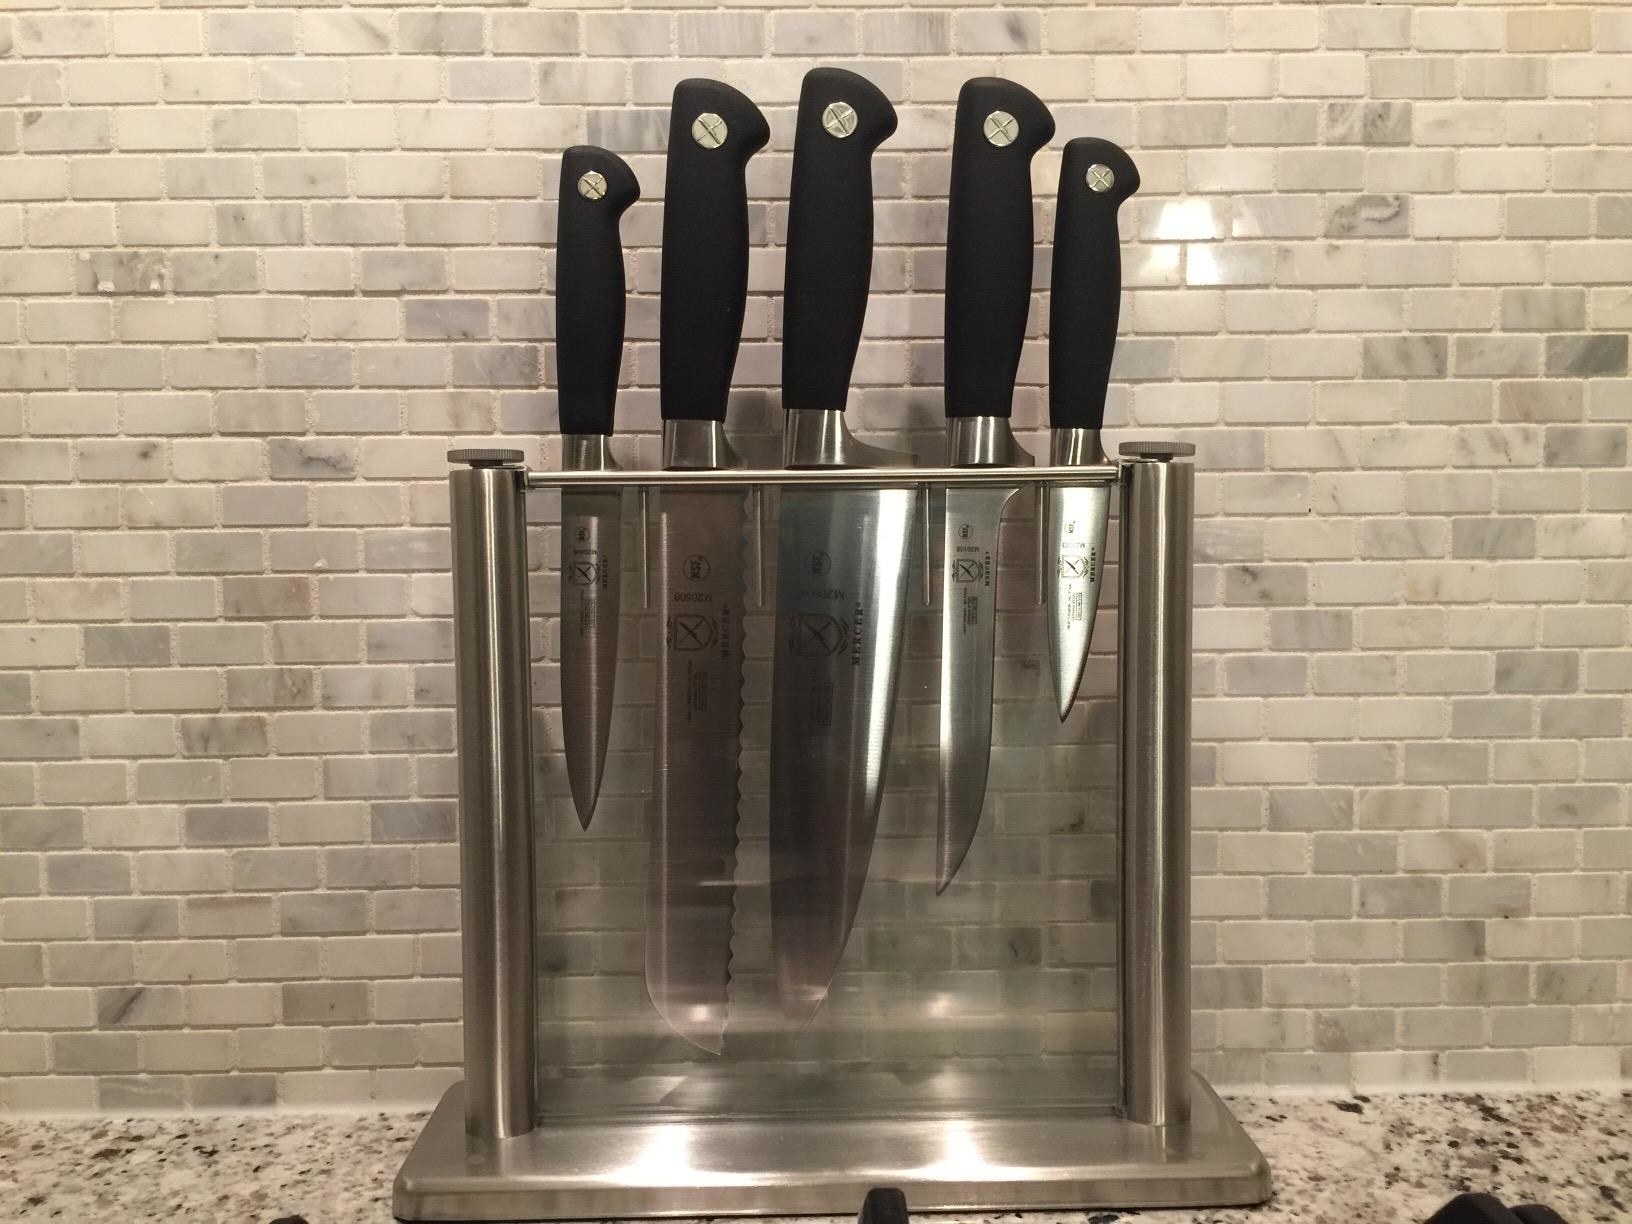 Reviewer photo of the knife set